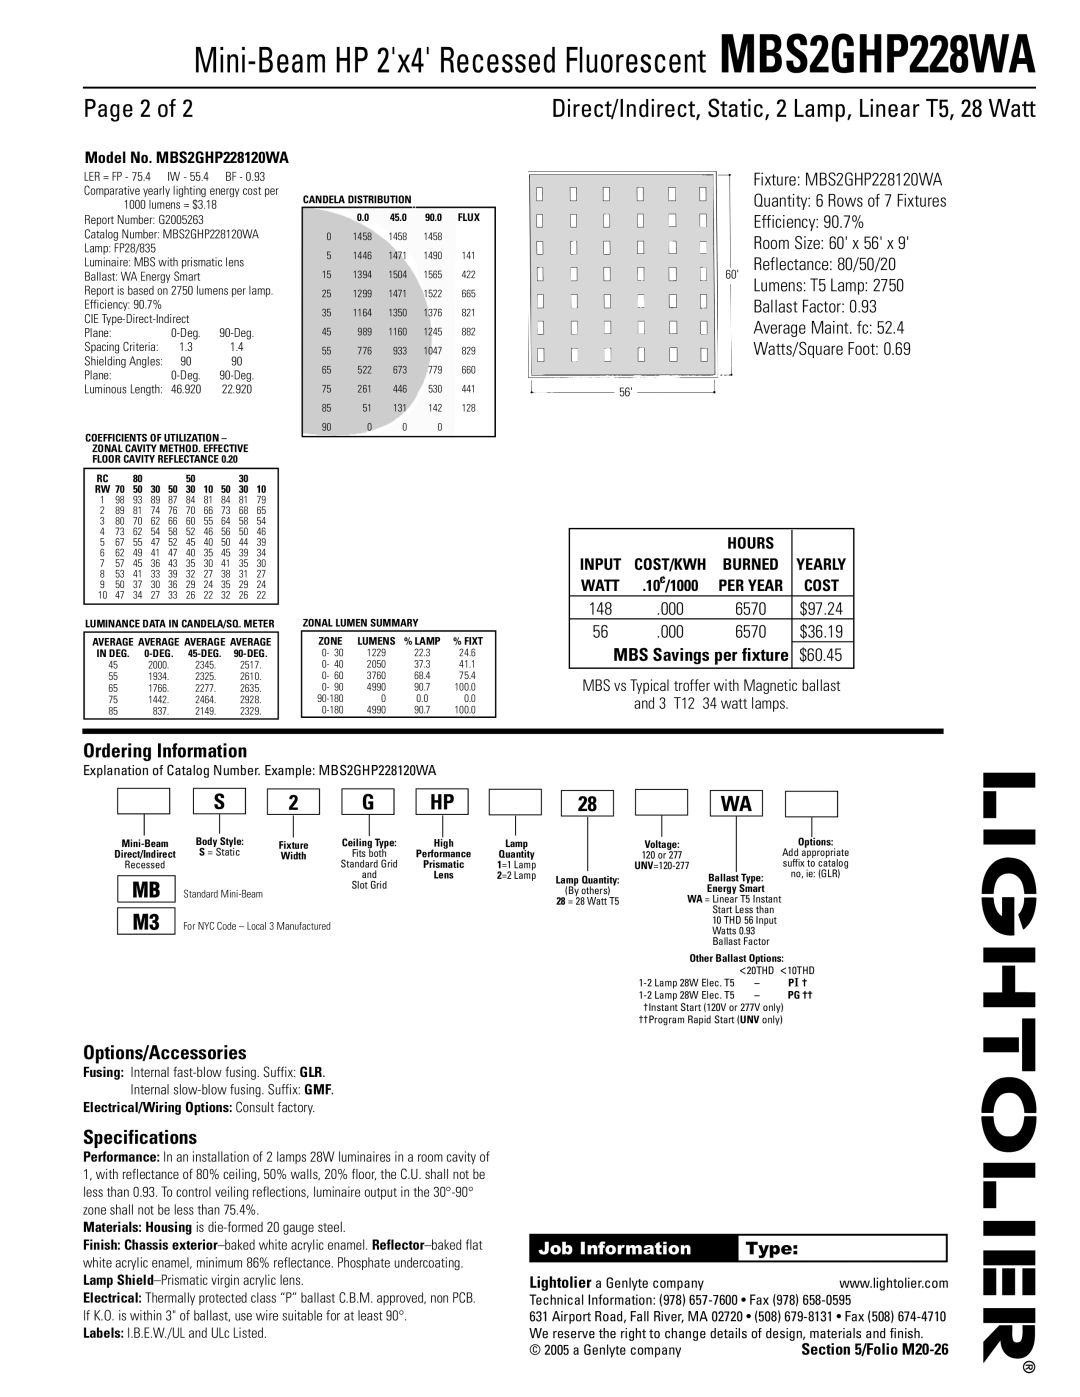 Lightolier MBS2GHP228WA Page 2 of, Ordering Information, Options/Accessories, Specifications, Hours, Input, Cost/Kwh, Watt 